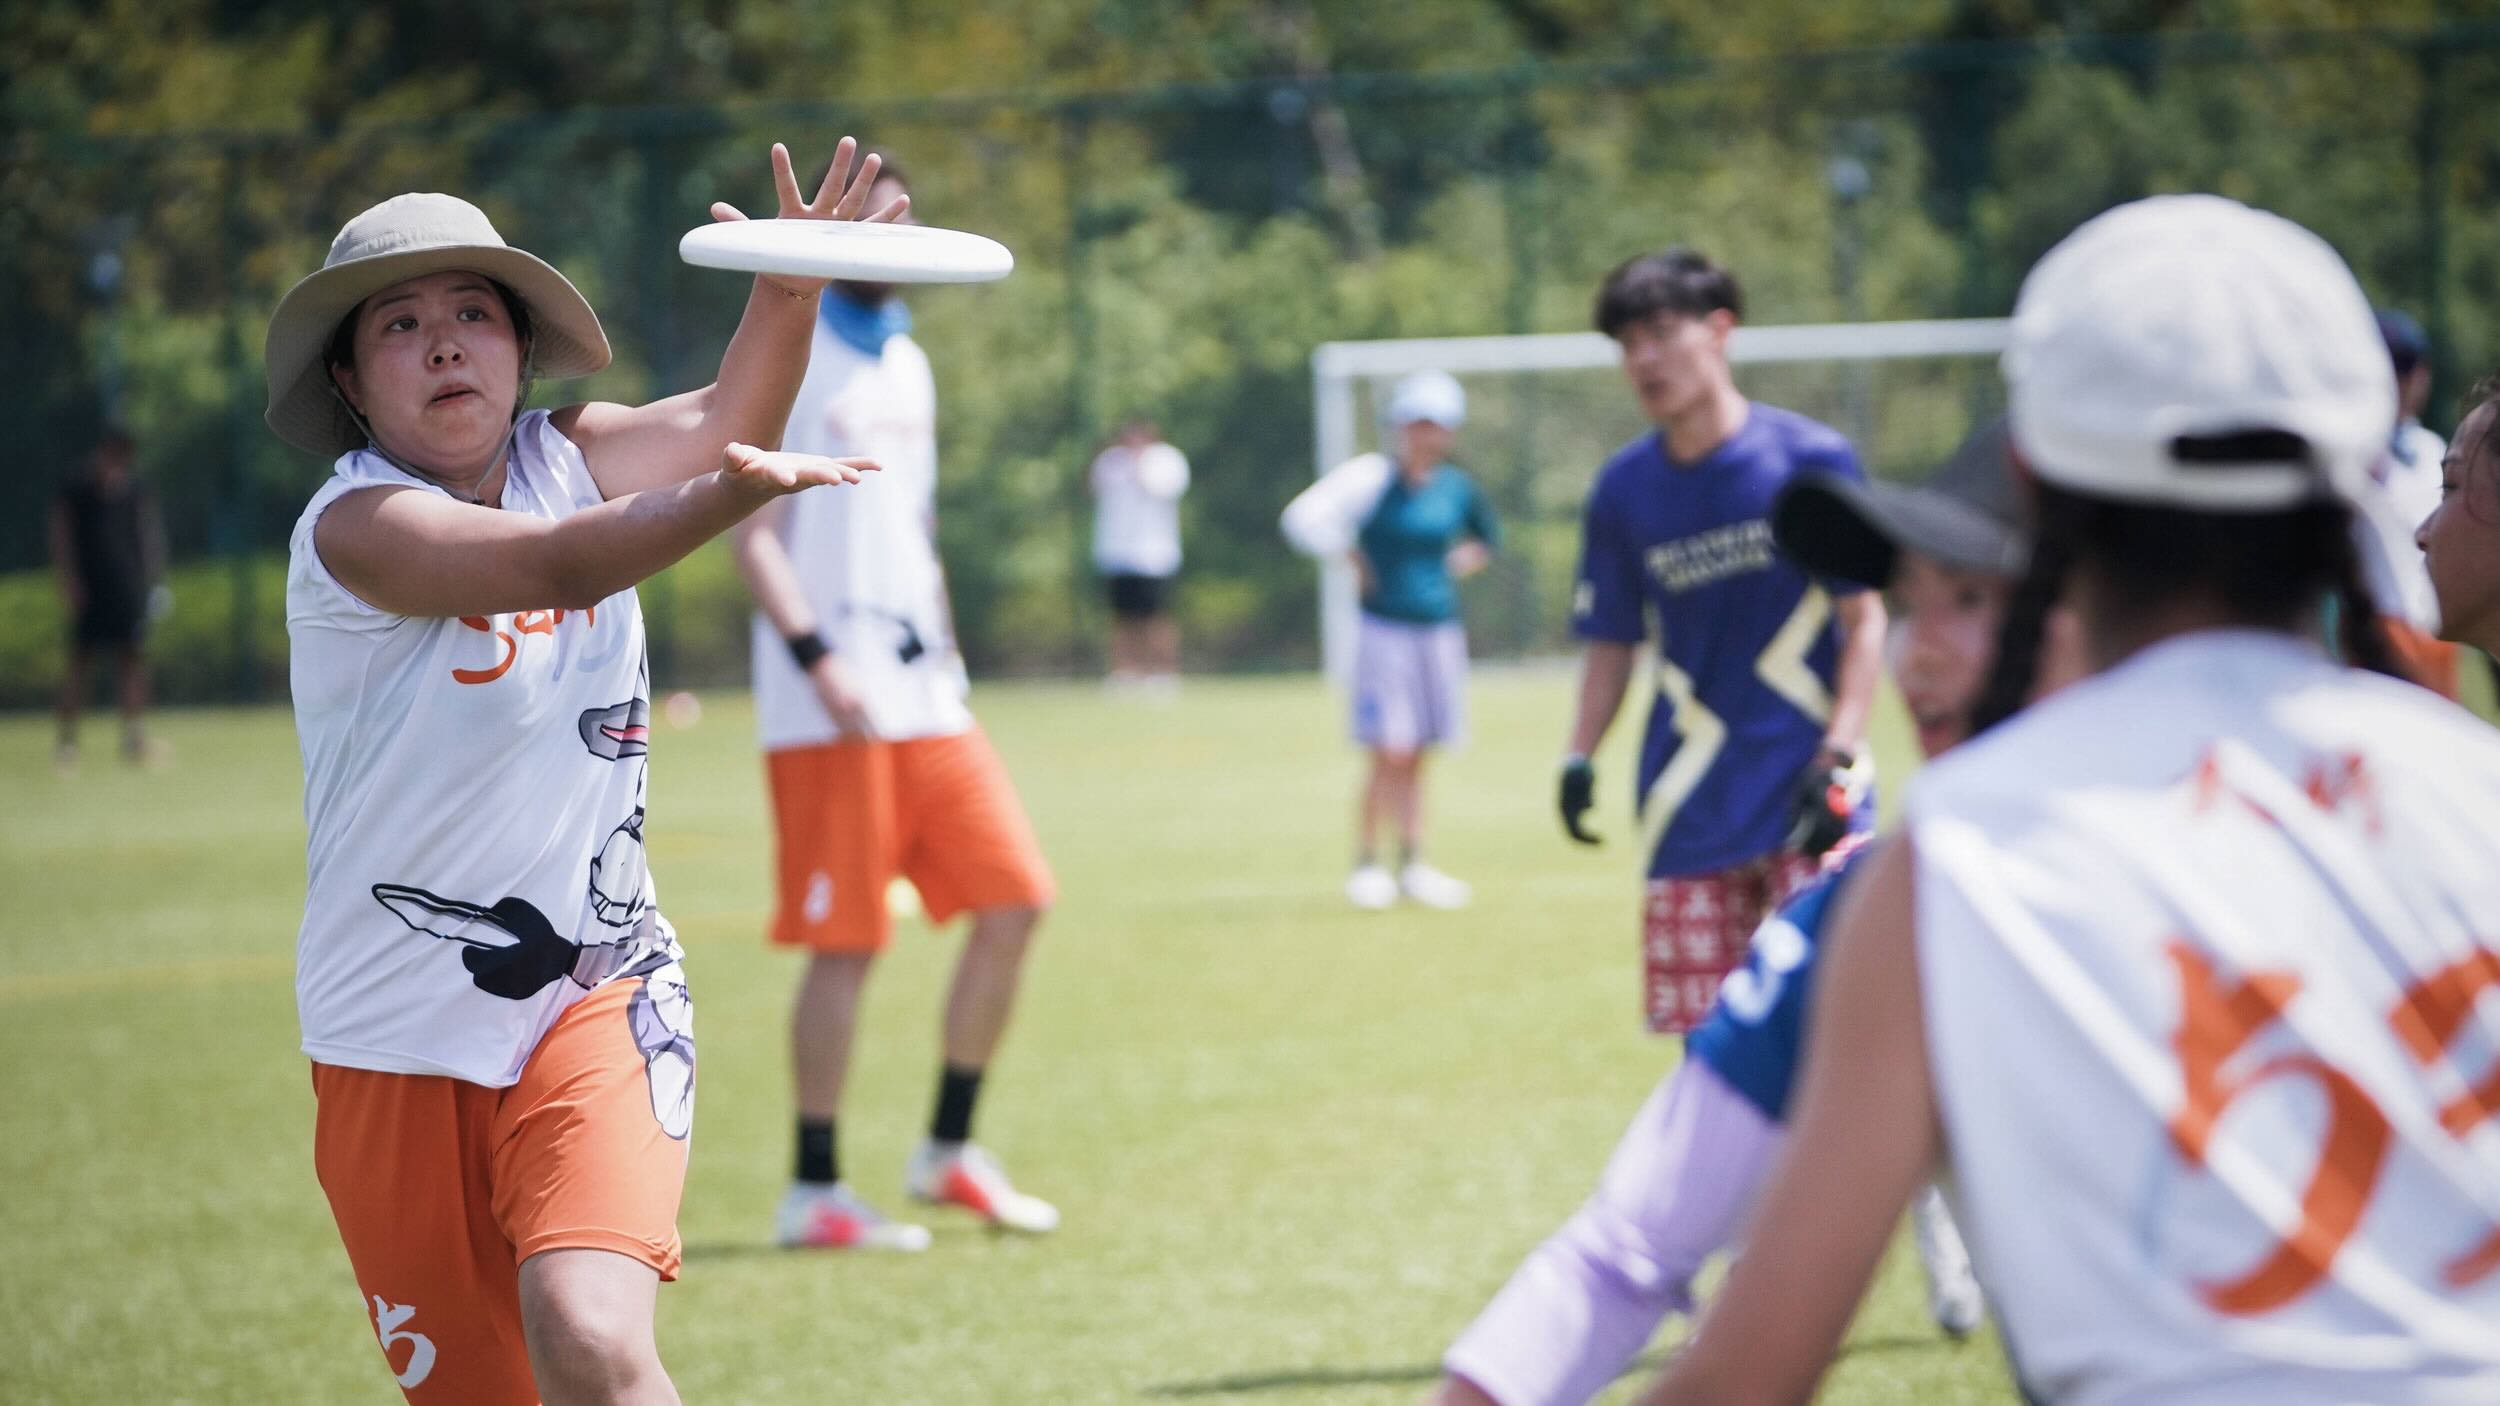 How Many Points Does A Team Need To Win An Ultimate Frisbee Game?